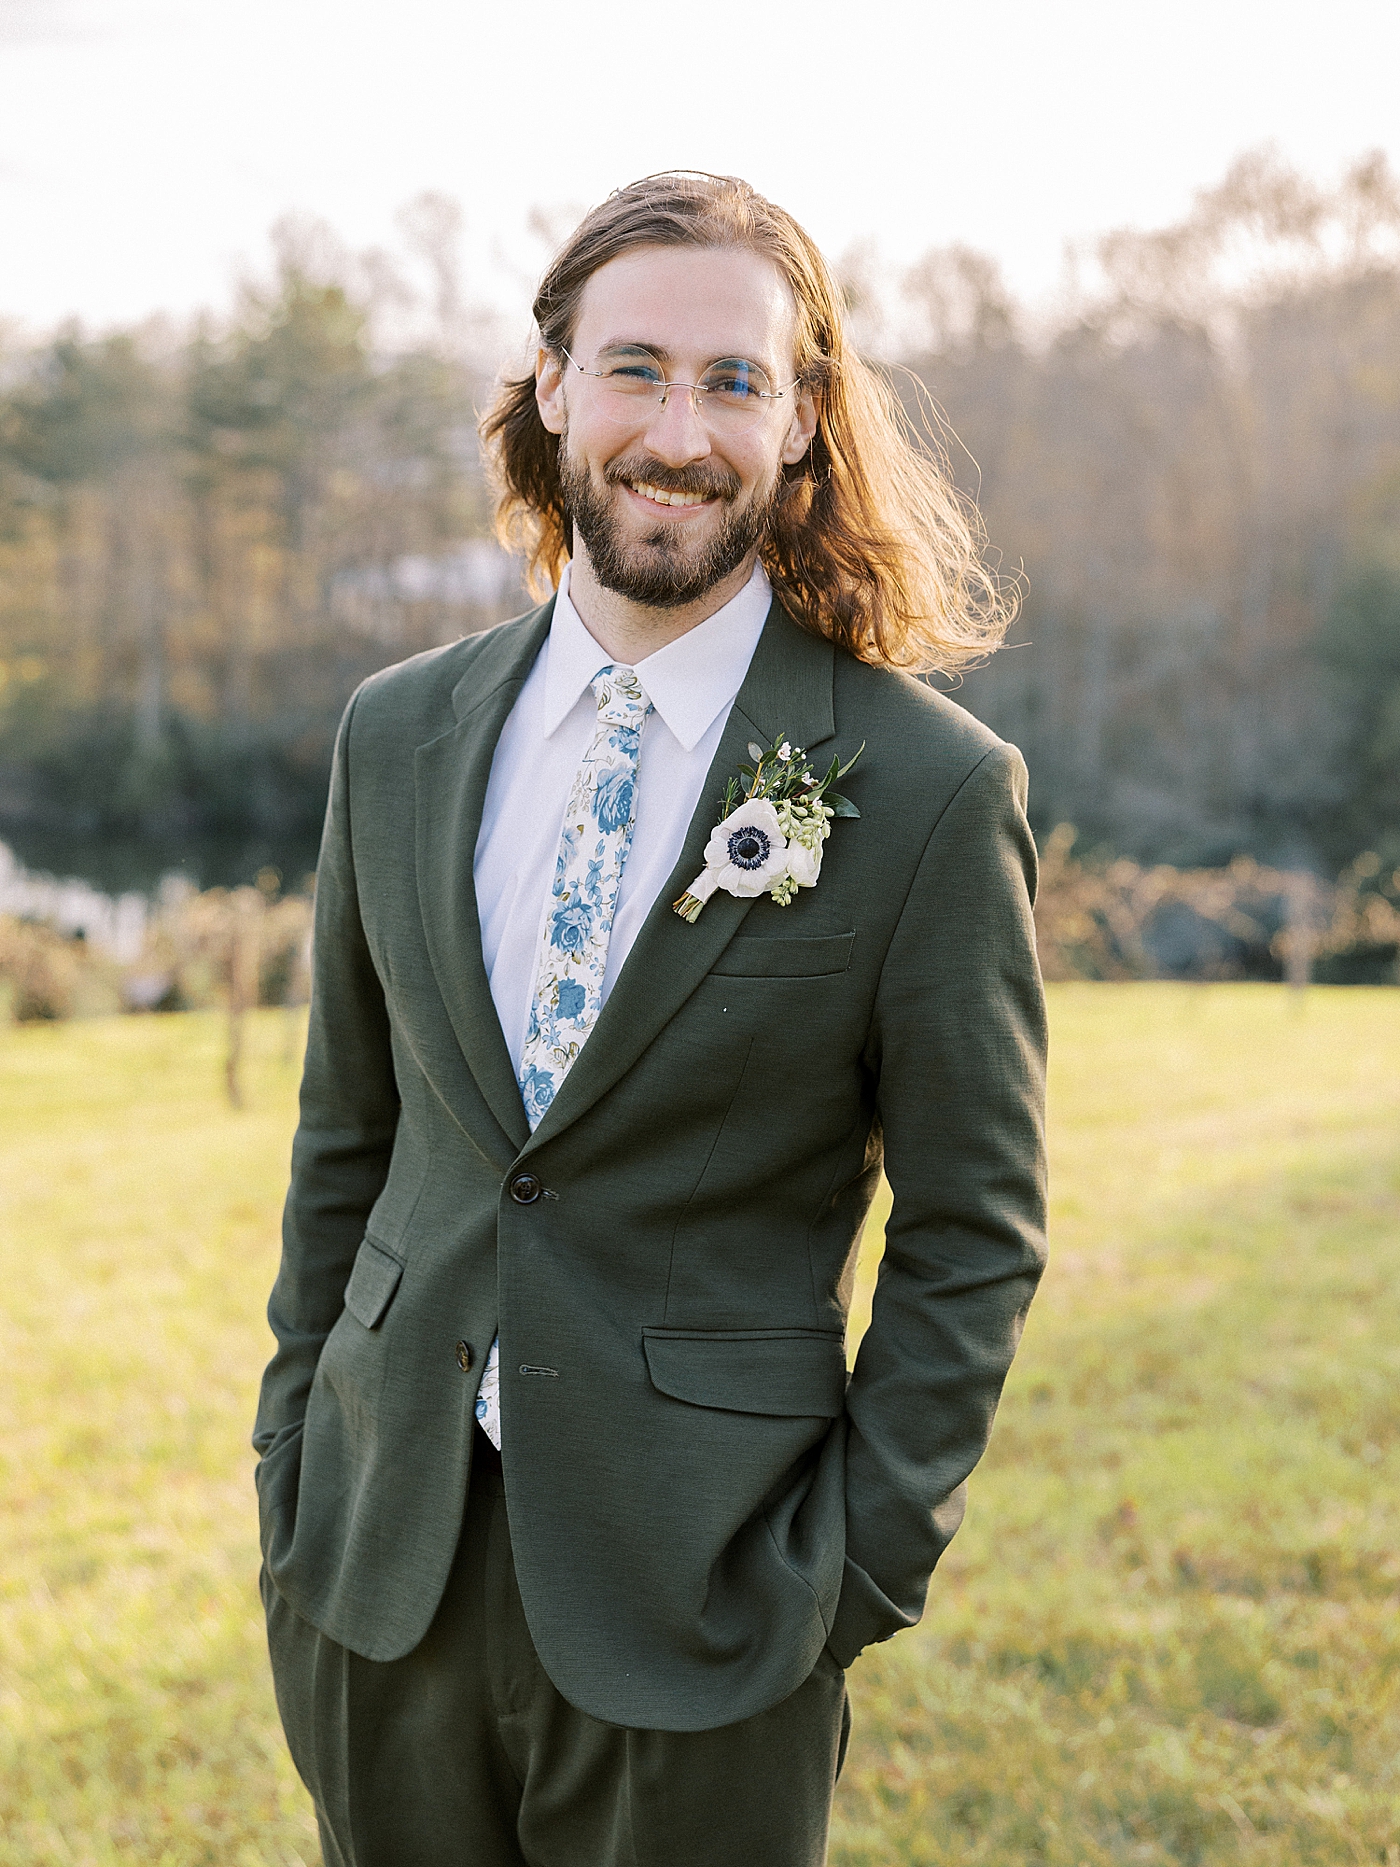 Groom in a suit smiling after his North Carolina Wedding | Photo by Diane Sotero Photography